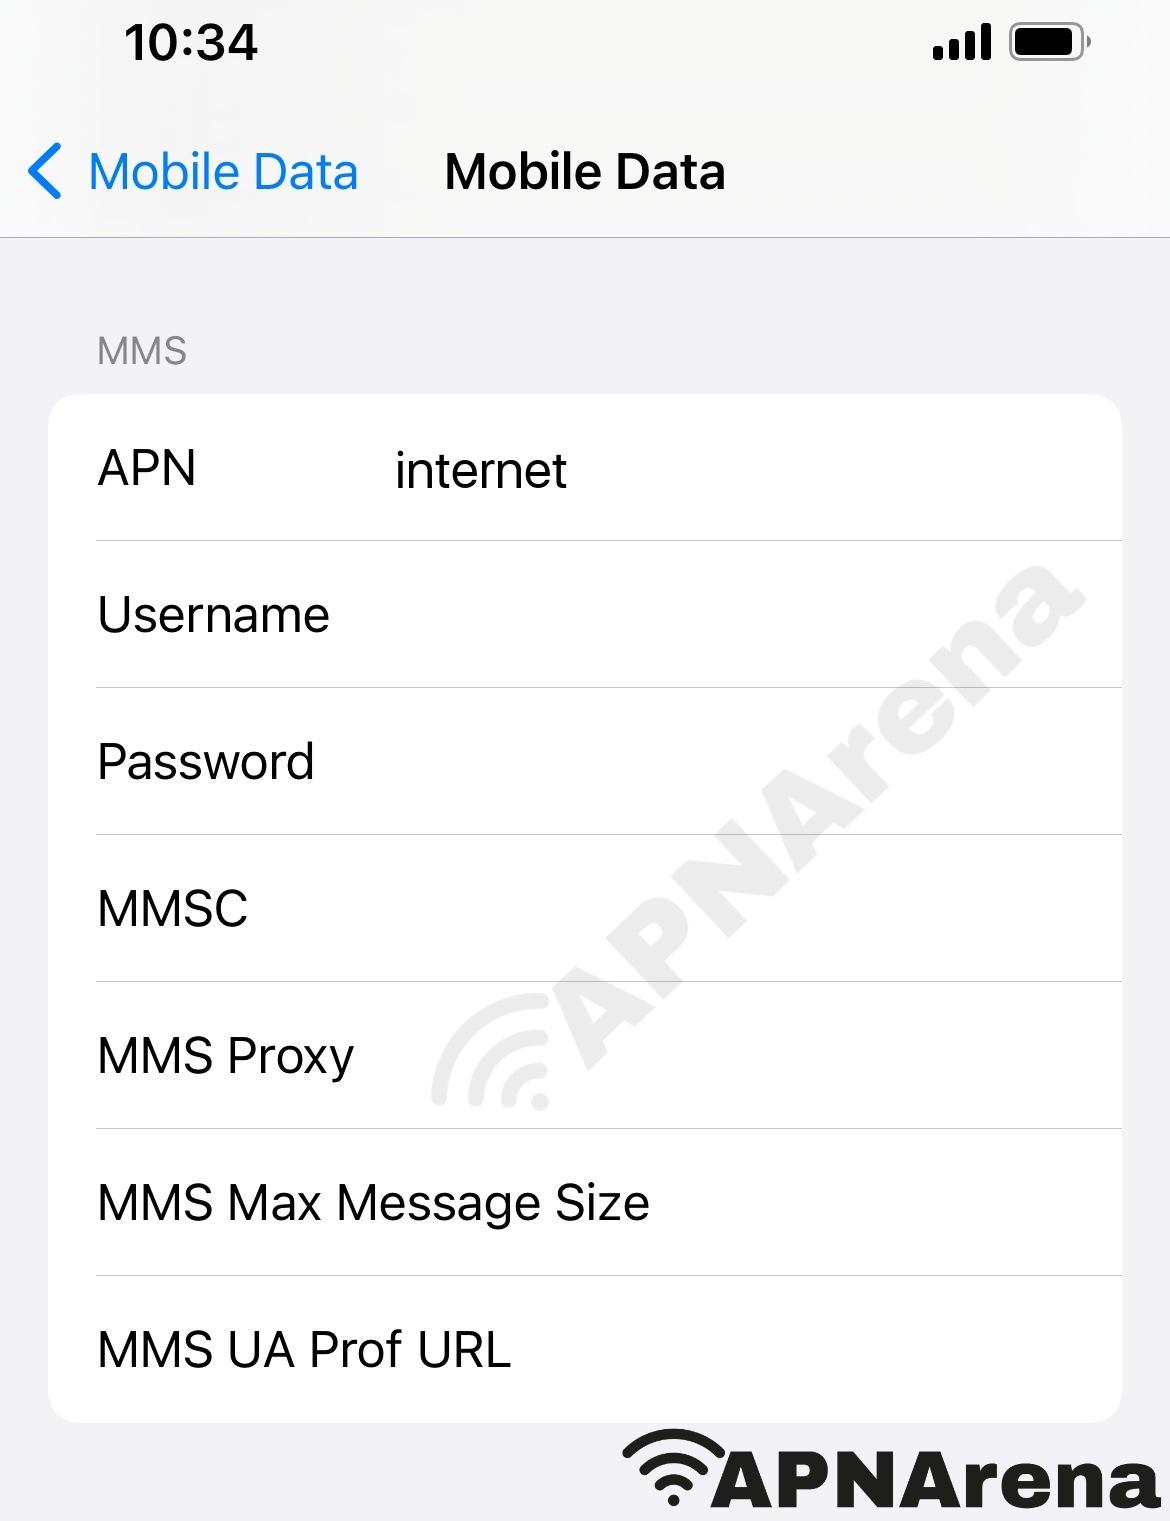 Ufone MMS Settings for iPhone